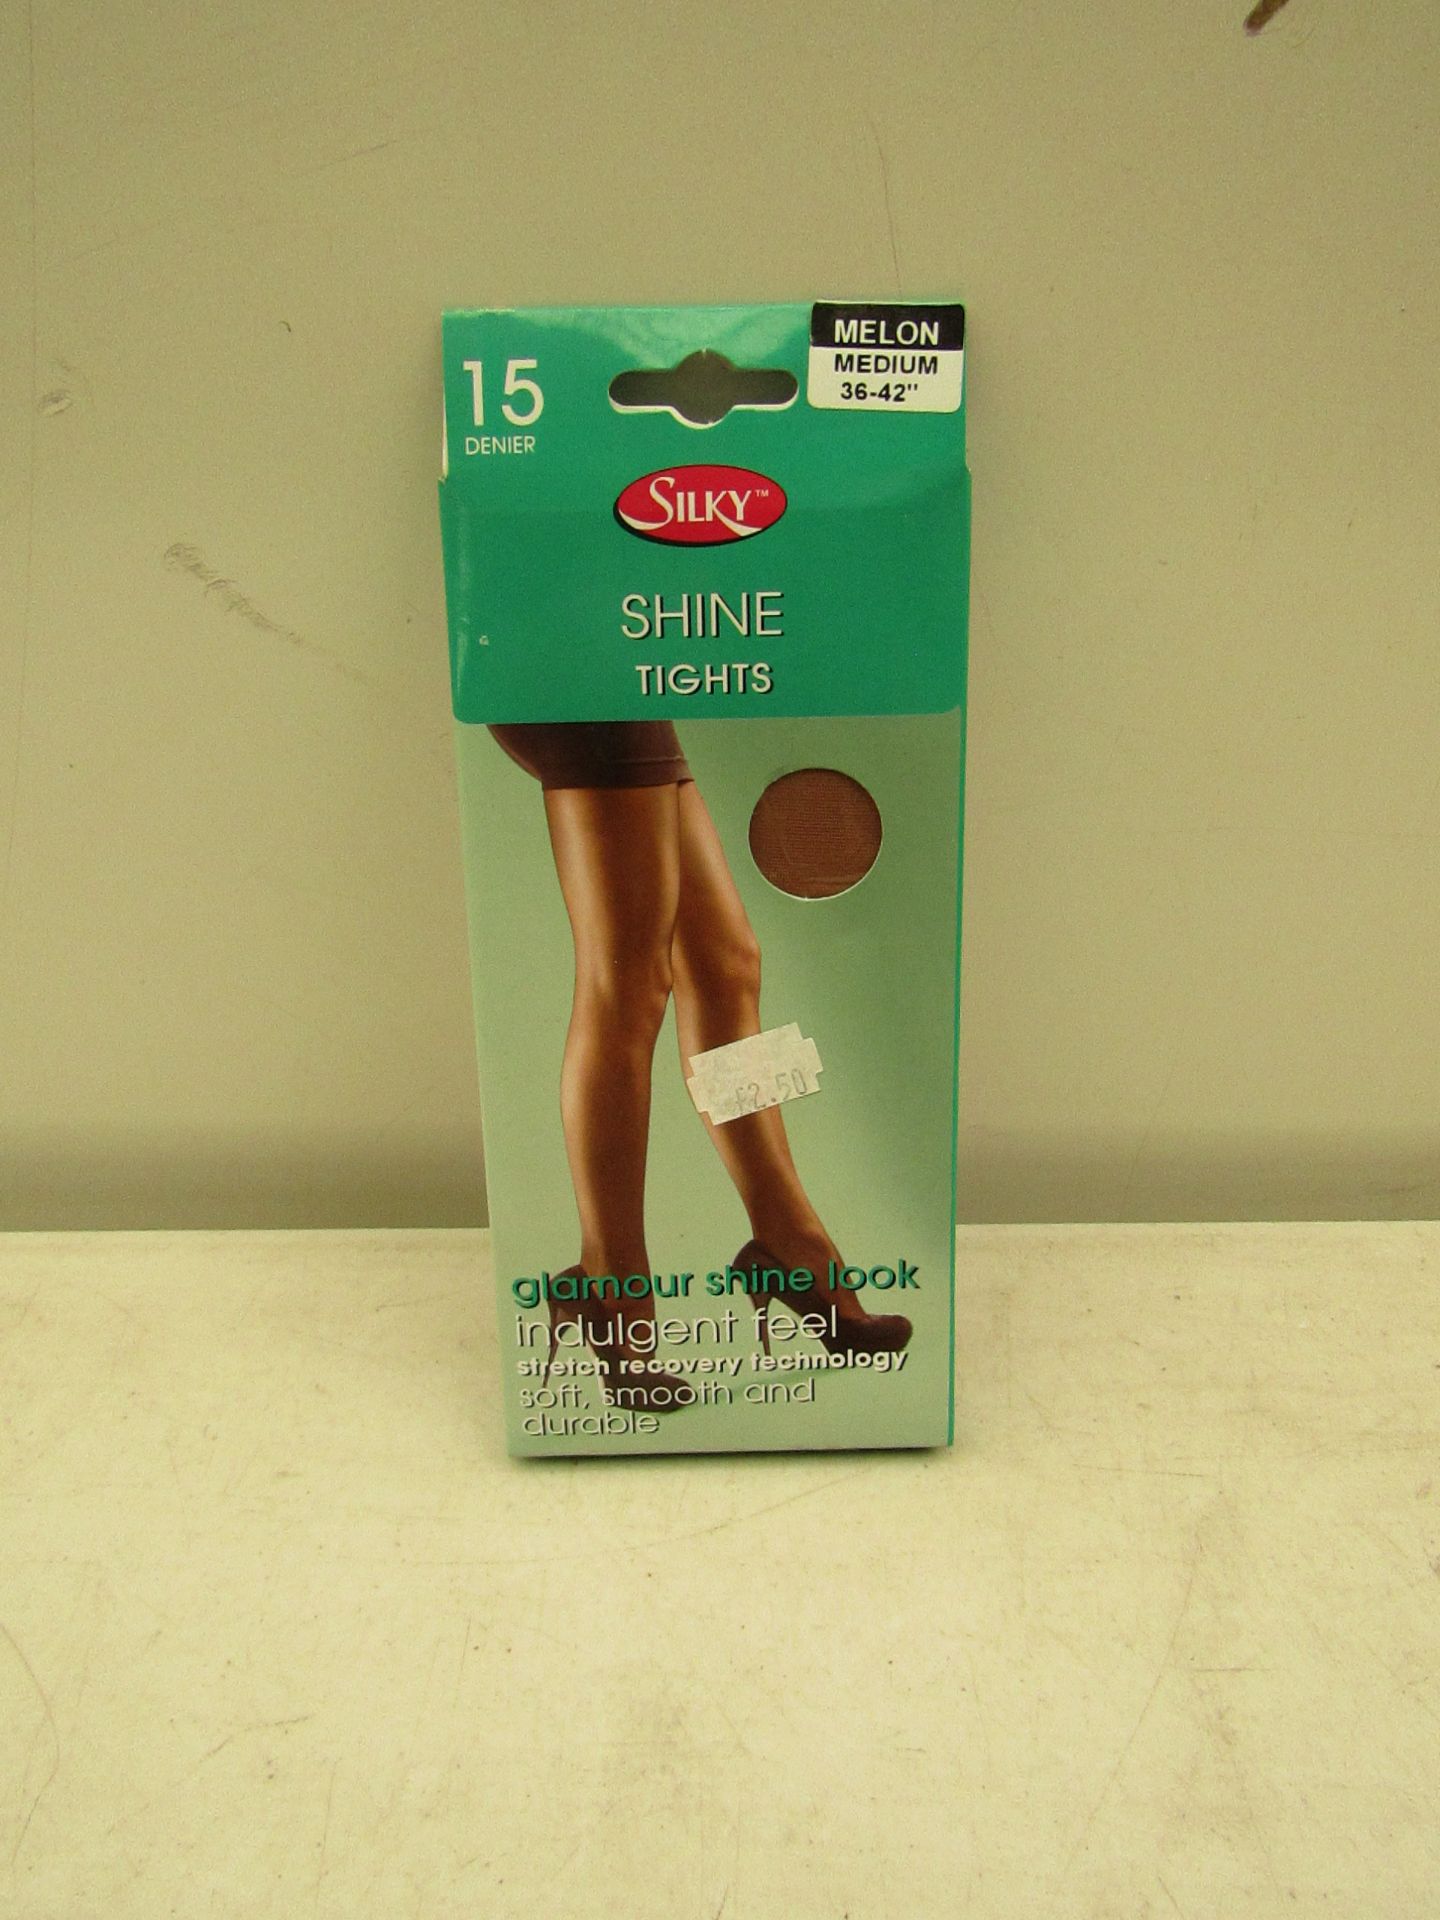 4x Silky shine tights glamour shine look, new and boxed.